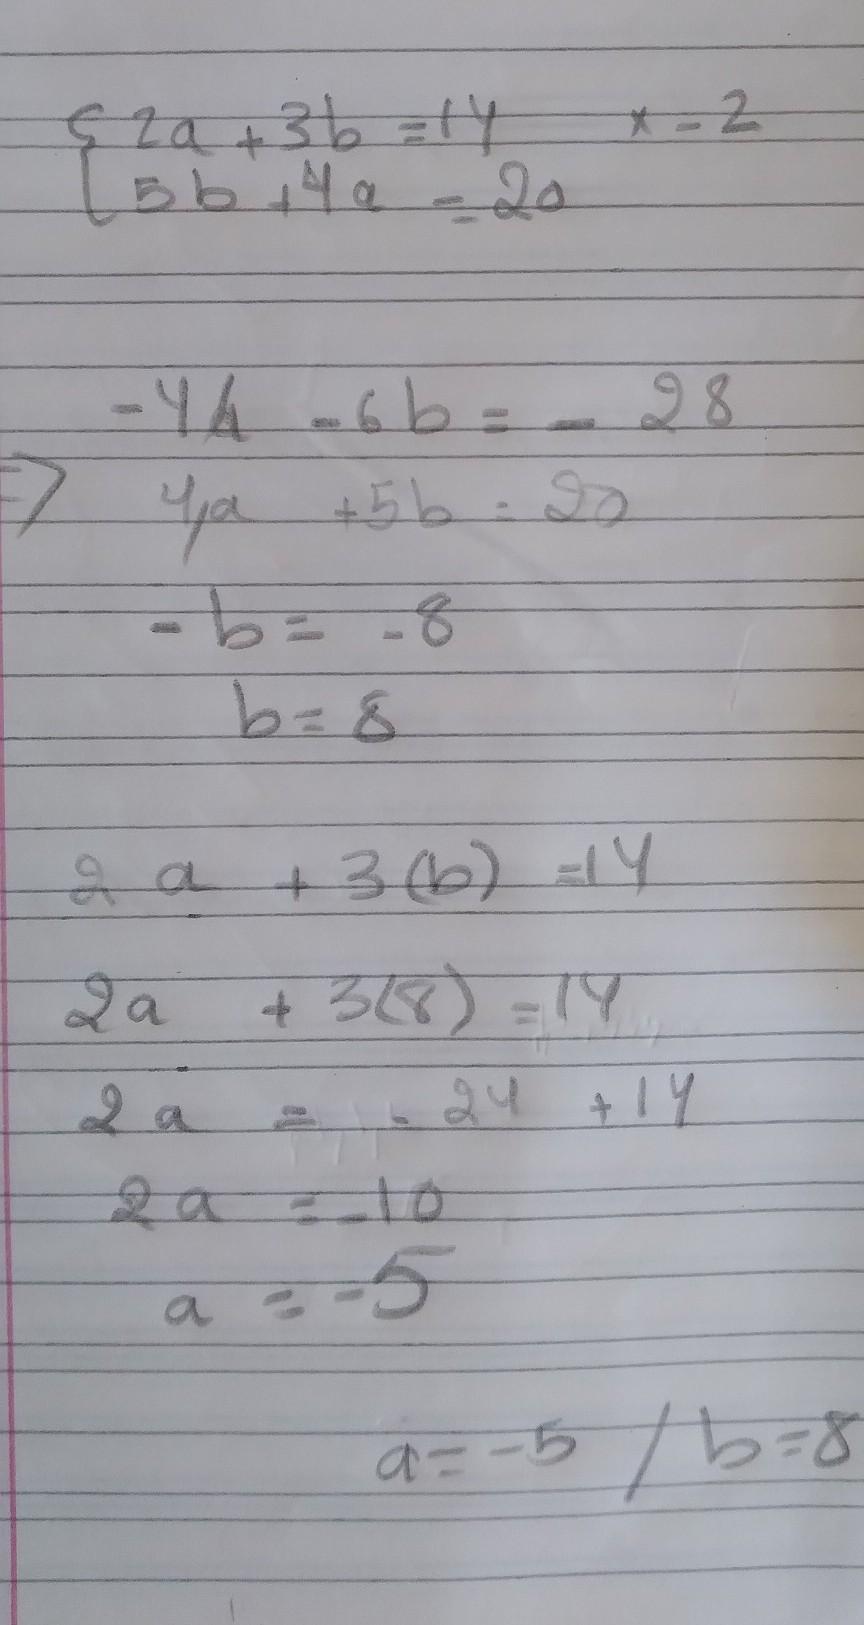 Hi Guys, How To Calculate This In System?{2a+3b=14{5b+4a=20Thanks,